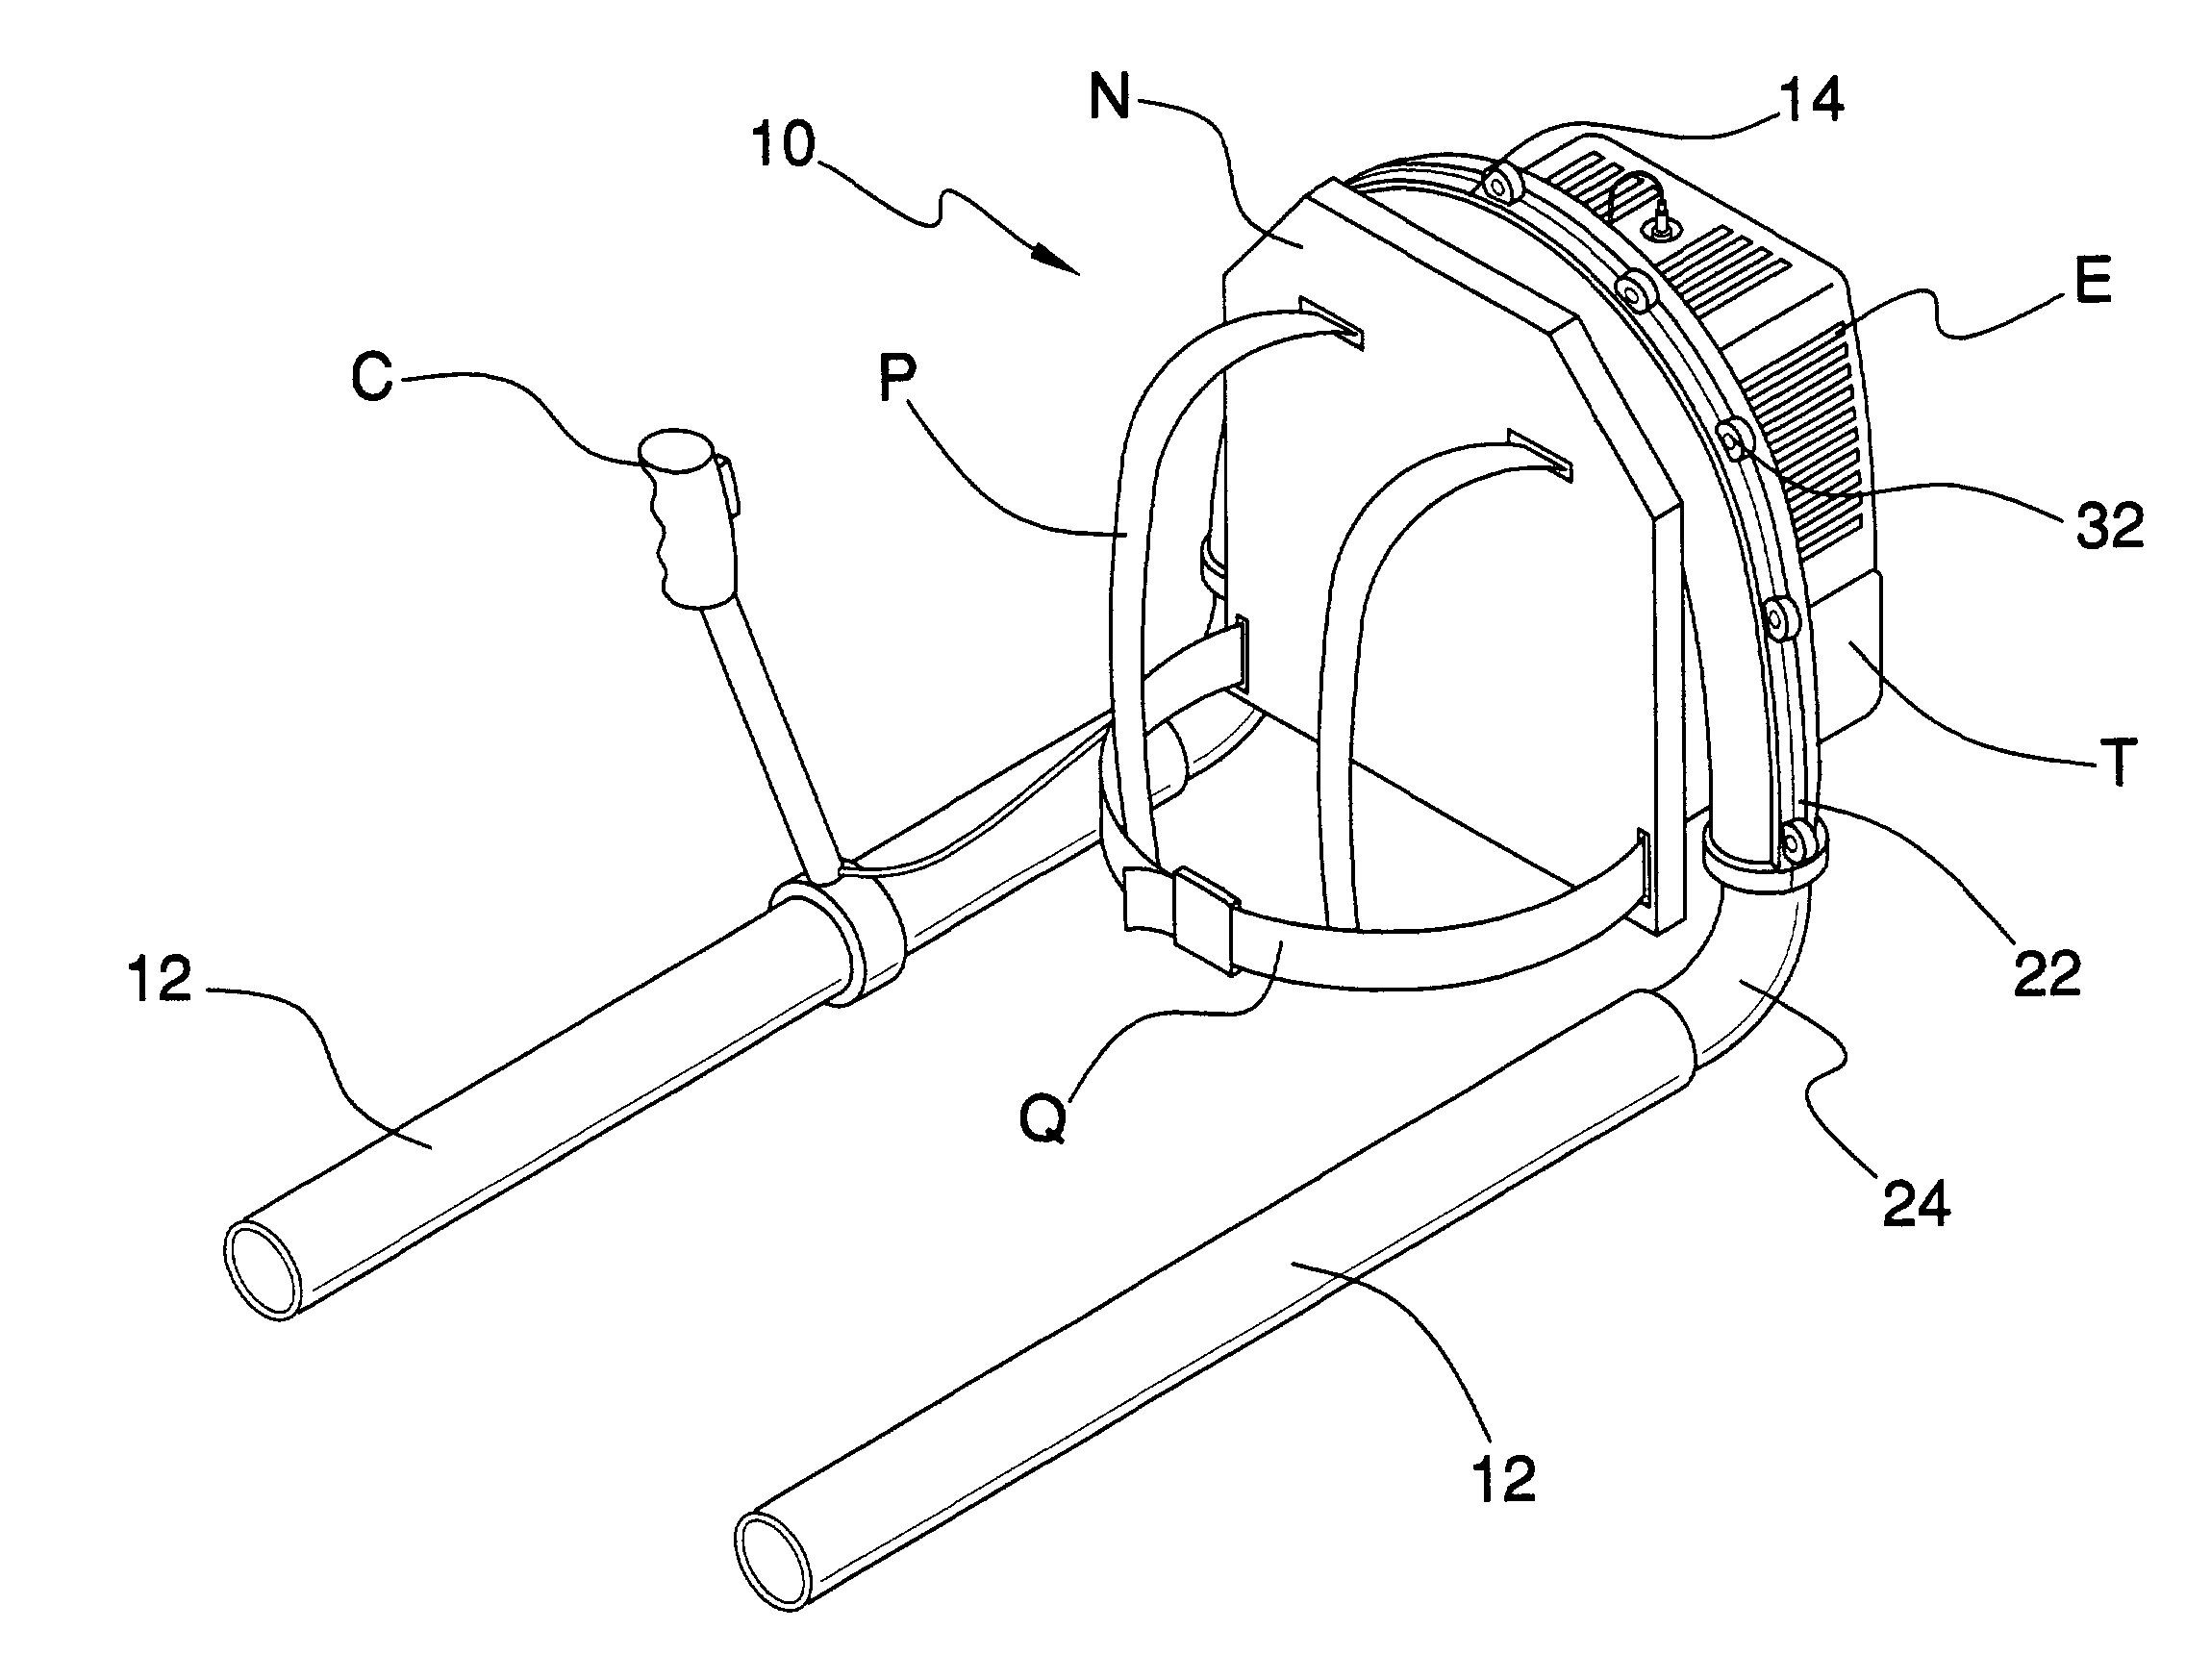 Blower with dual tubes